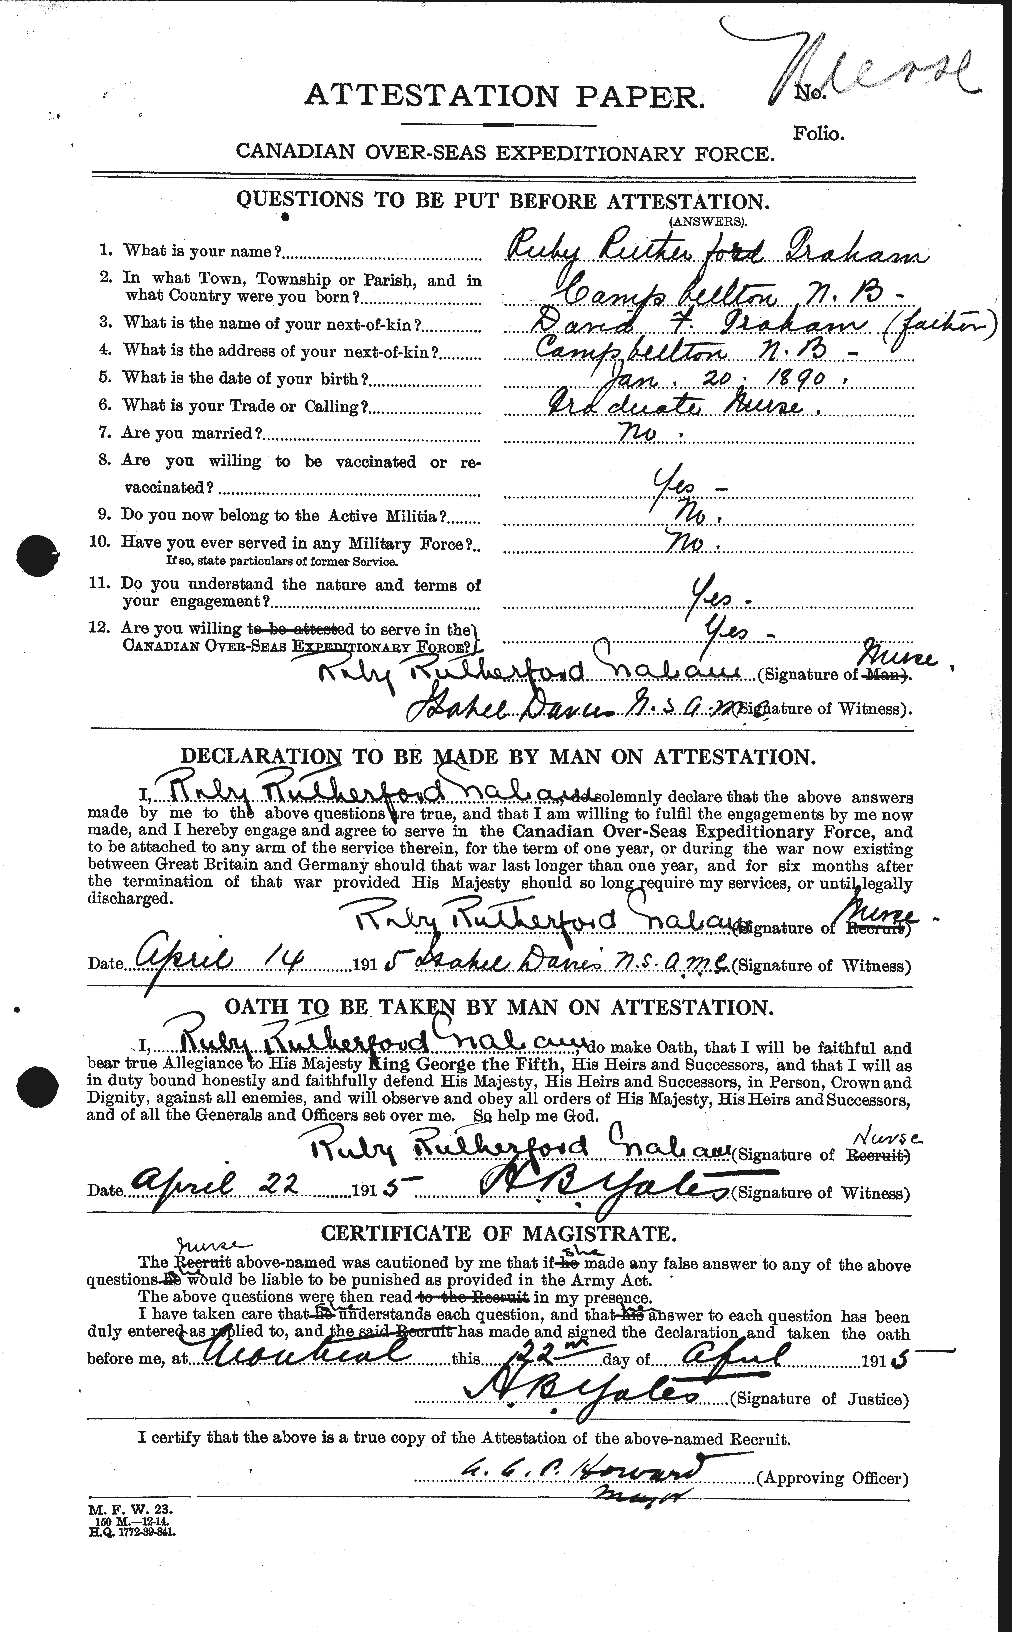 Personnel Records of the First World War - CEF 359443a